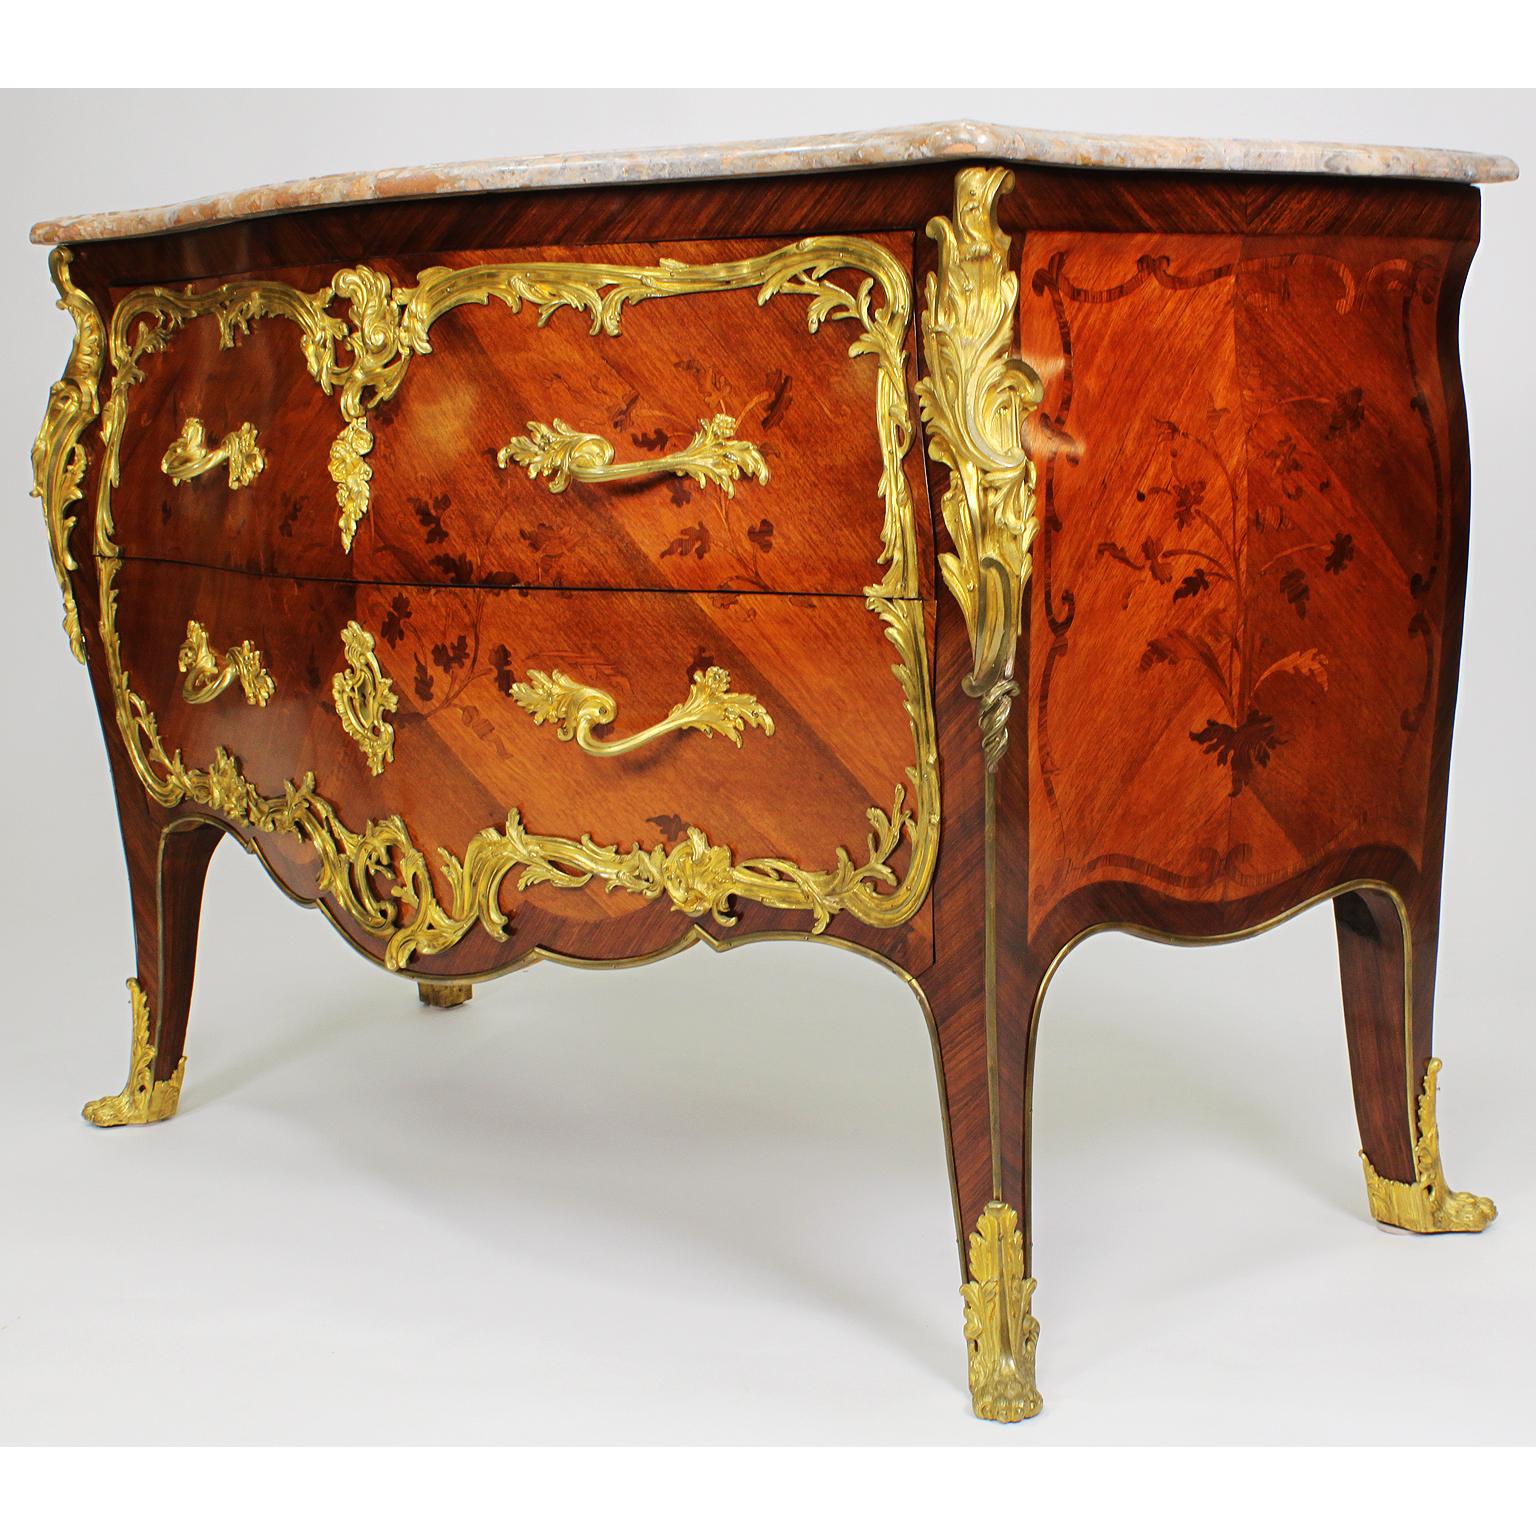 A fine French 19th-20th century Louis XV style gilt bronze mounted satinwood and tulipwood Bois Satiné and Bois de Bout floral Marquetry two-drawer commode of bombé serpentine form, with a veined Rivera brown/pink marble top above two long drawers